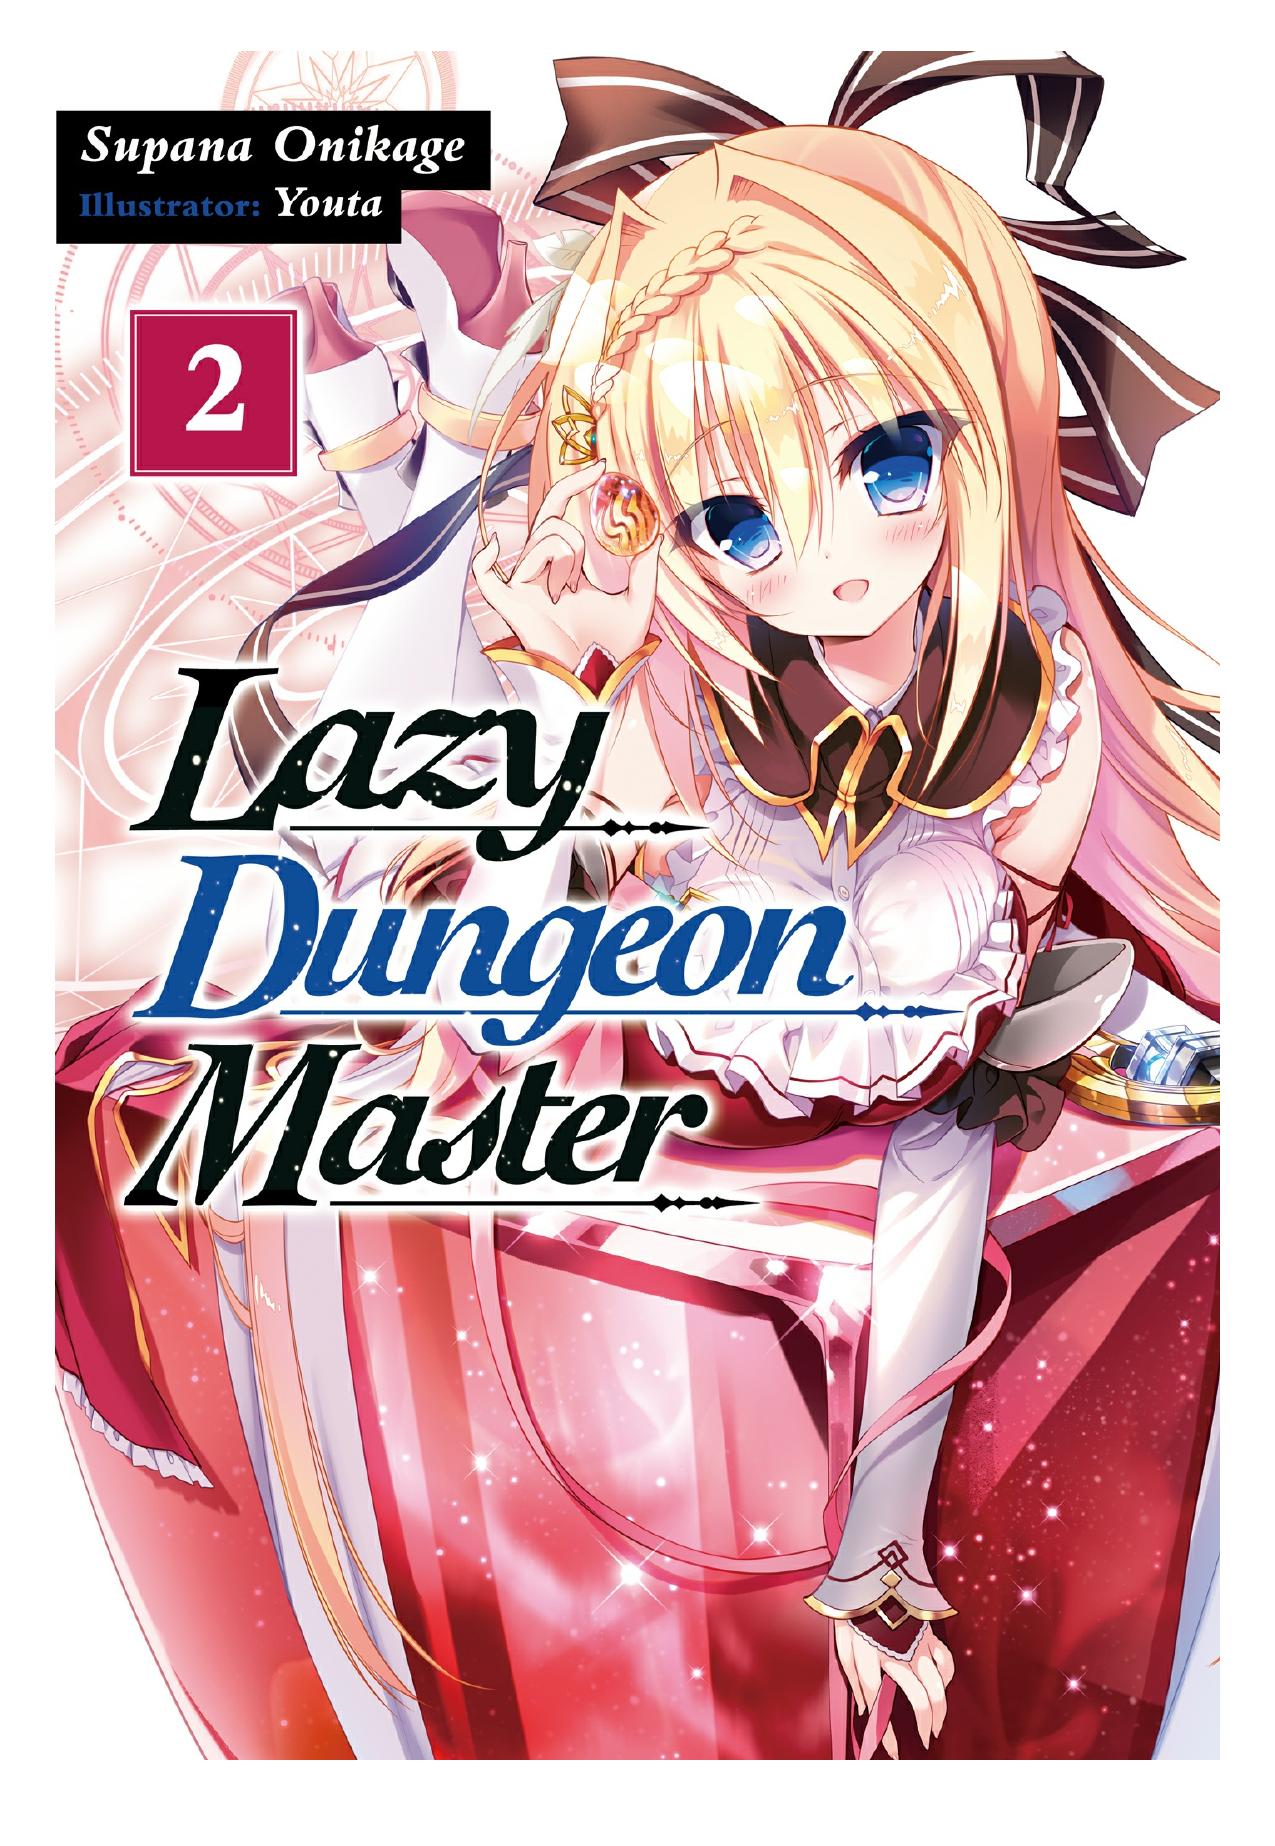 Lazy Dungeon Master: Volume 2 by Supana Onikage